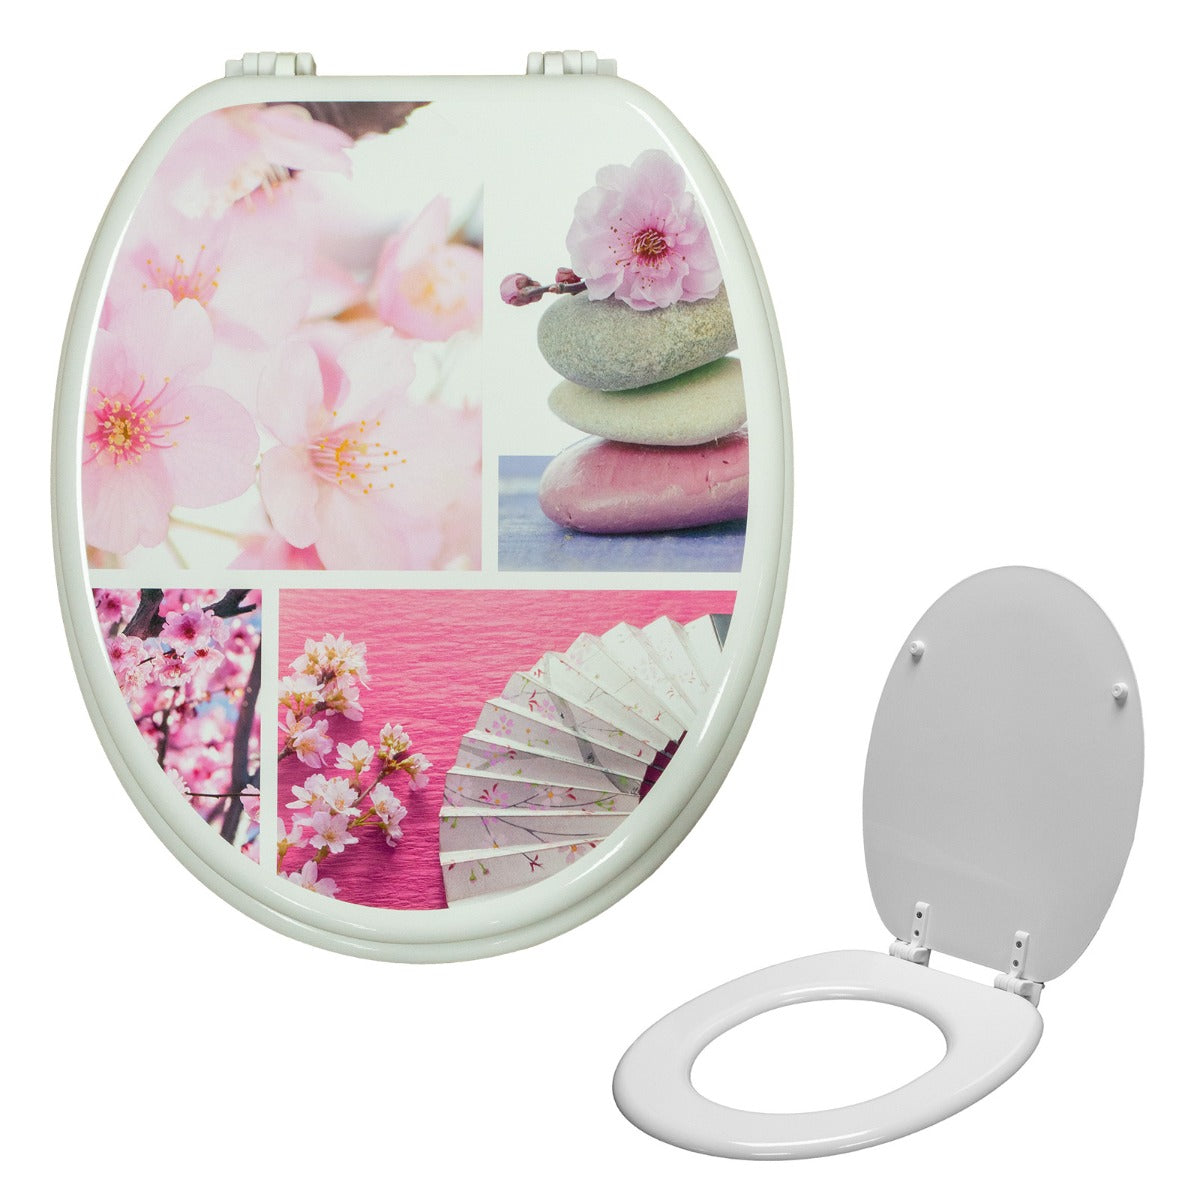 Universal Classic Oval Shaped Design Toilet Seat & Fixings Flower Pink Pattern Print